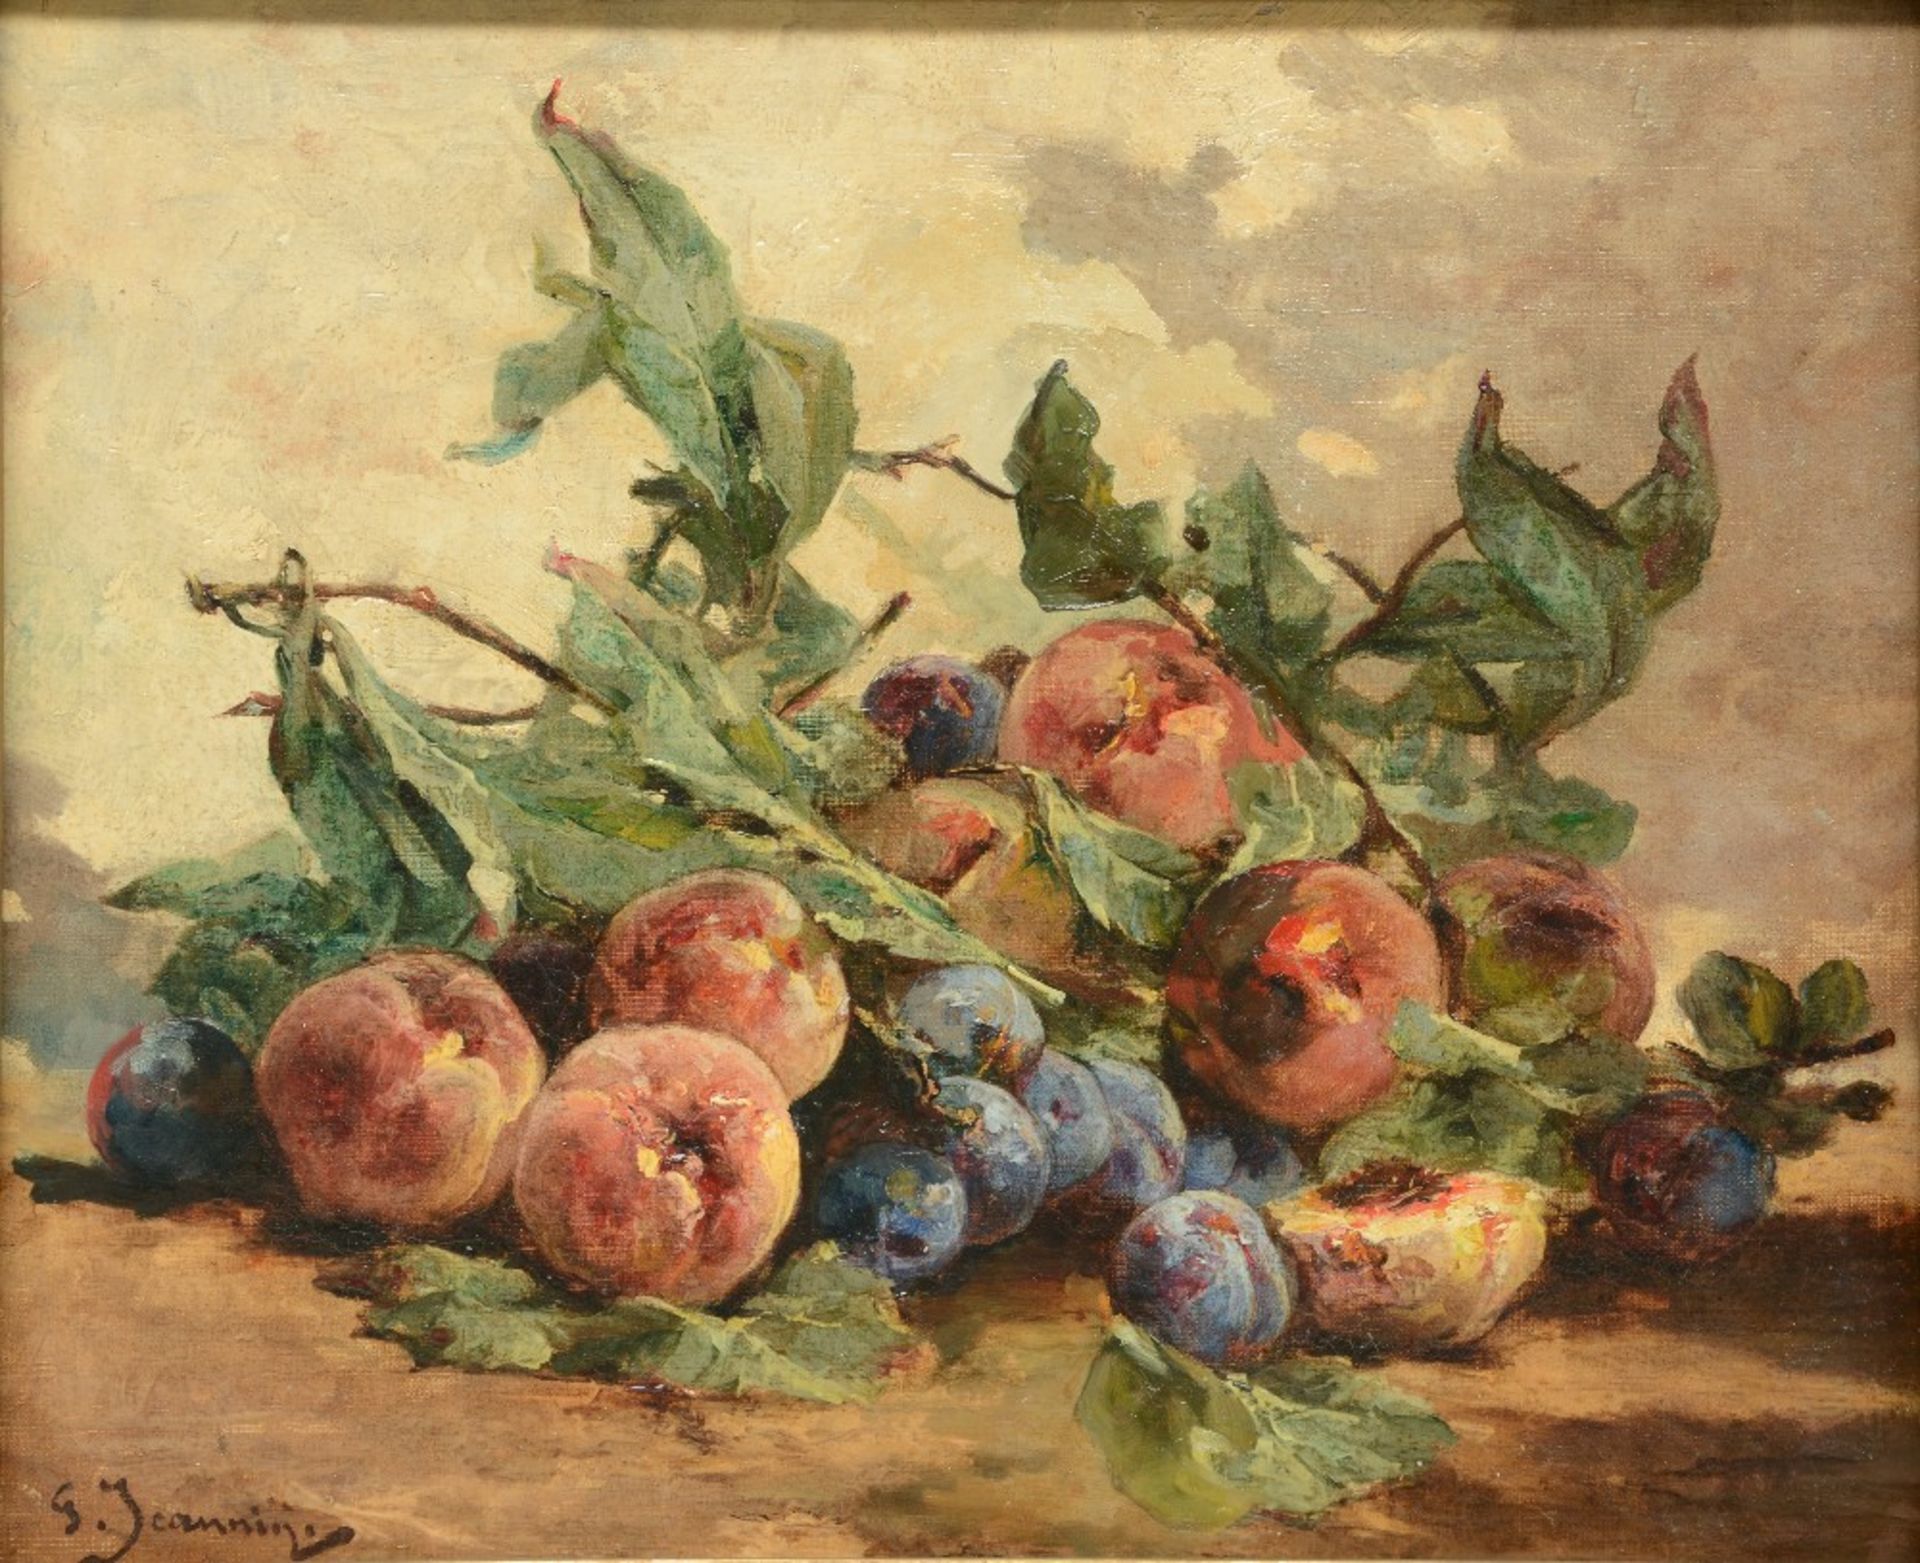 Jeannin G., a still life with fruits, oil on canvas, second half of the 19thC, 49,5 x 64,5 cm